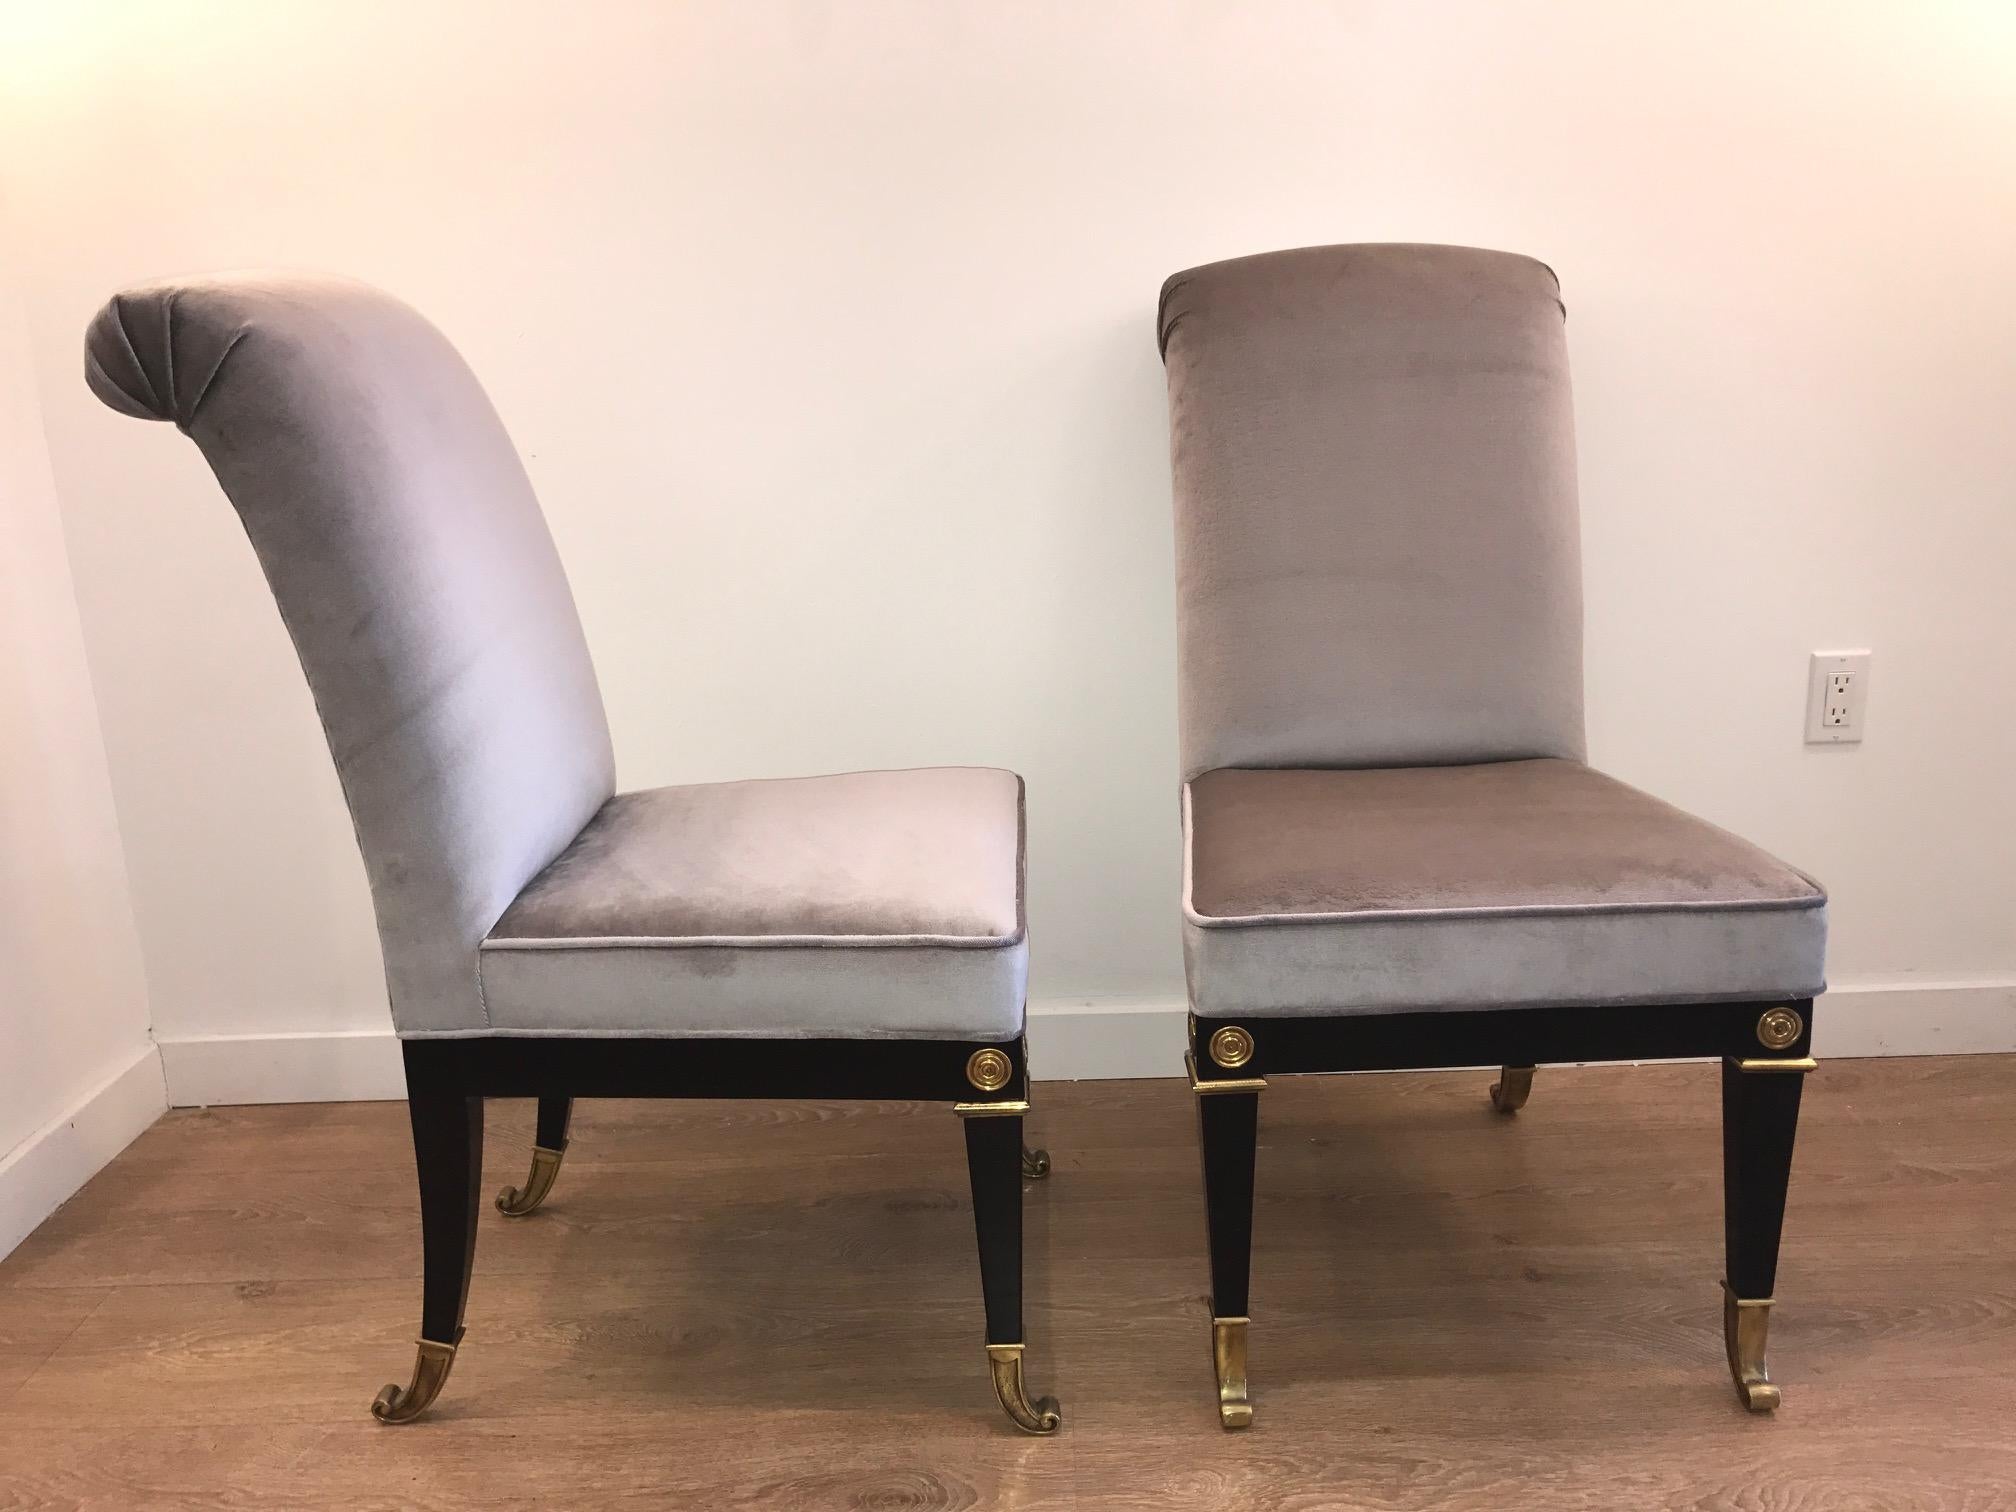 Set of six neoclassical dining room chairs by Mastercraft. Black lacquered saber legs terminating with bronze sabots. Chairs are newly restored and upholstered, bronze and brass elements where kept with original patina.

